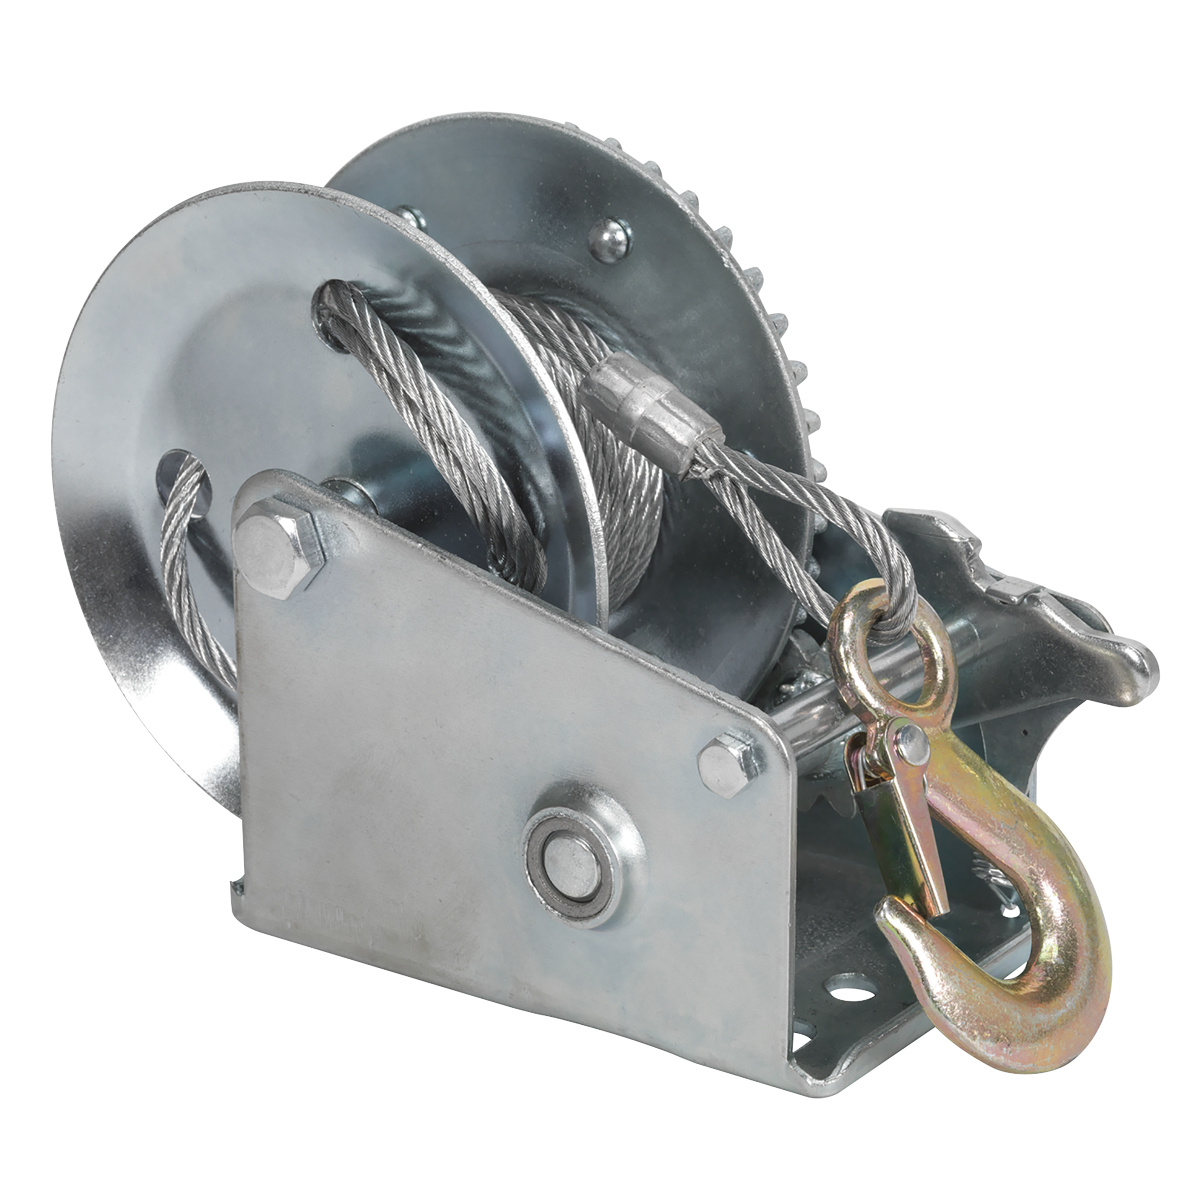 Geared Hand Winch 540kg Capacity with Cable